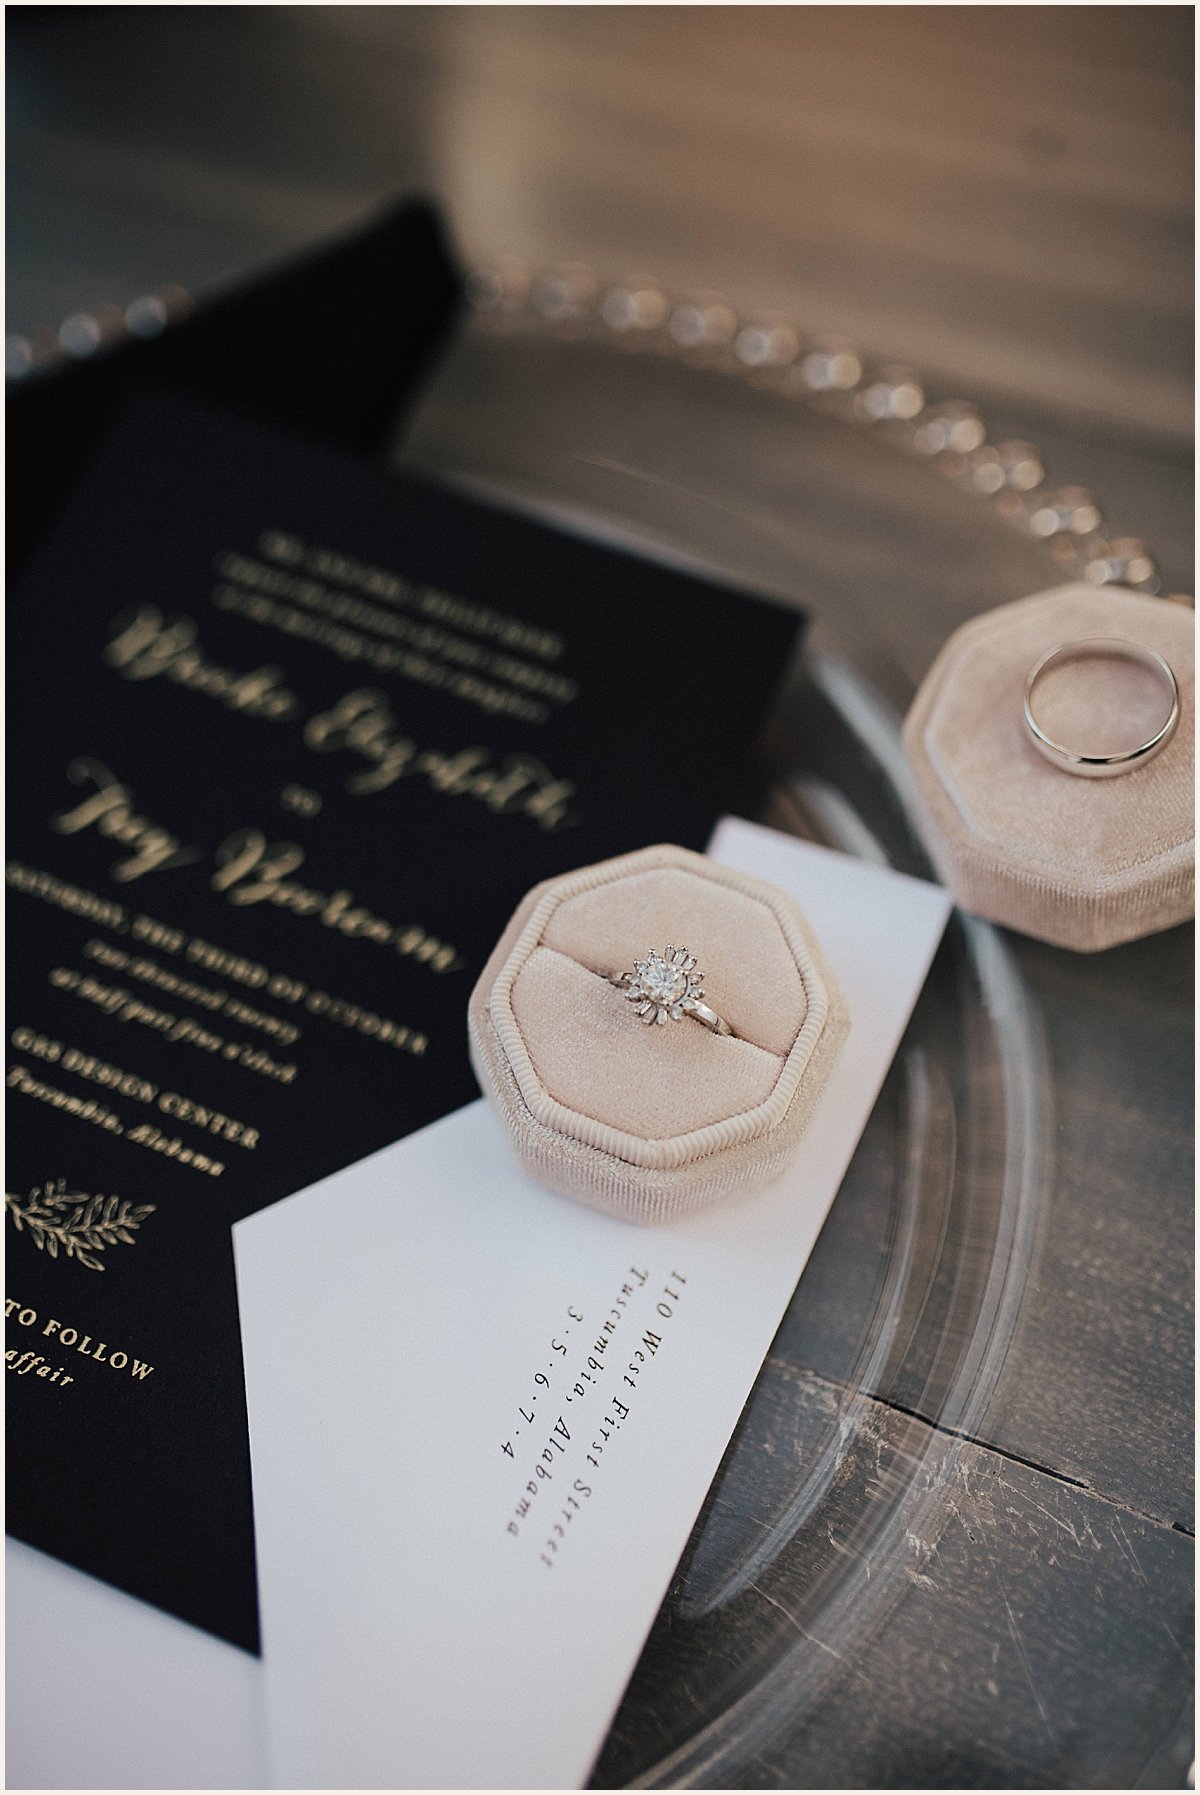 Engagement Ring Details on Wedding Day | Lauren Parr Photography